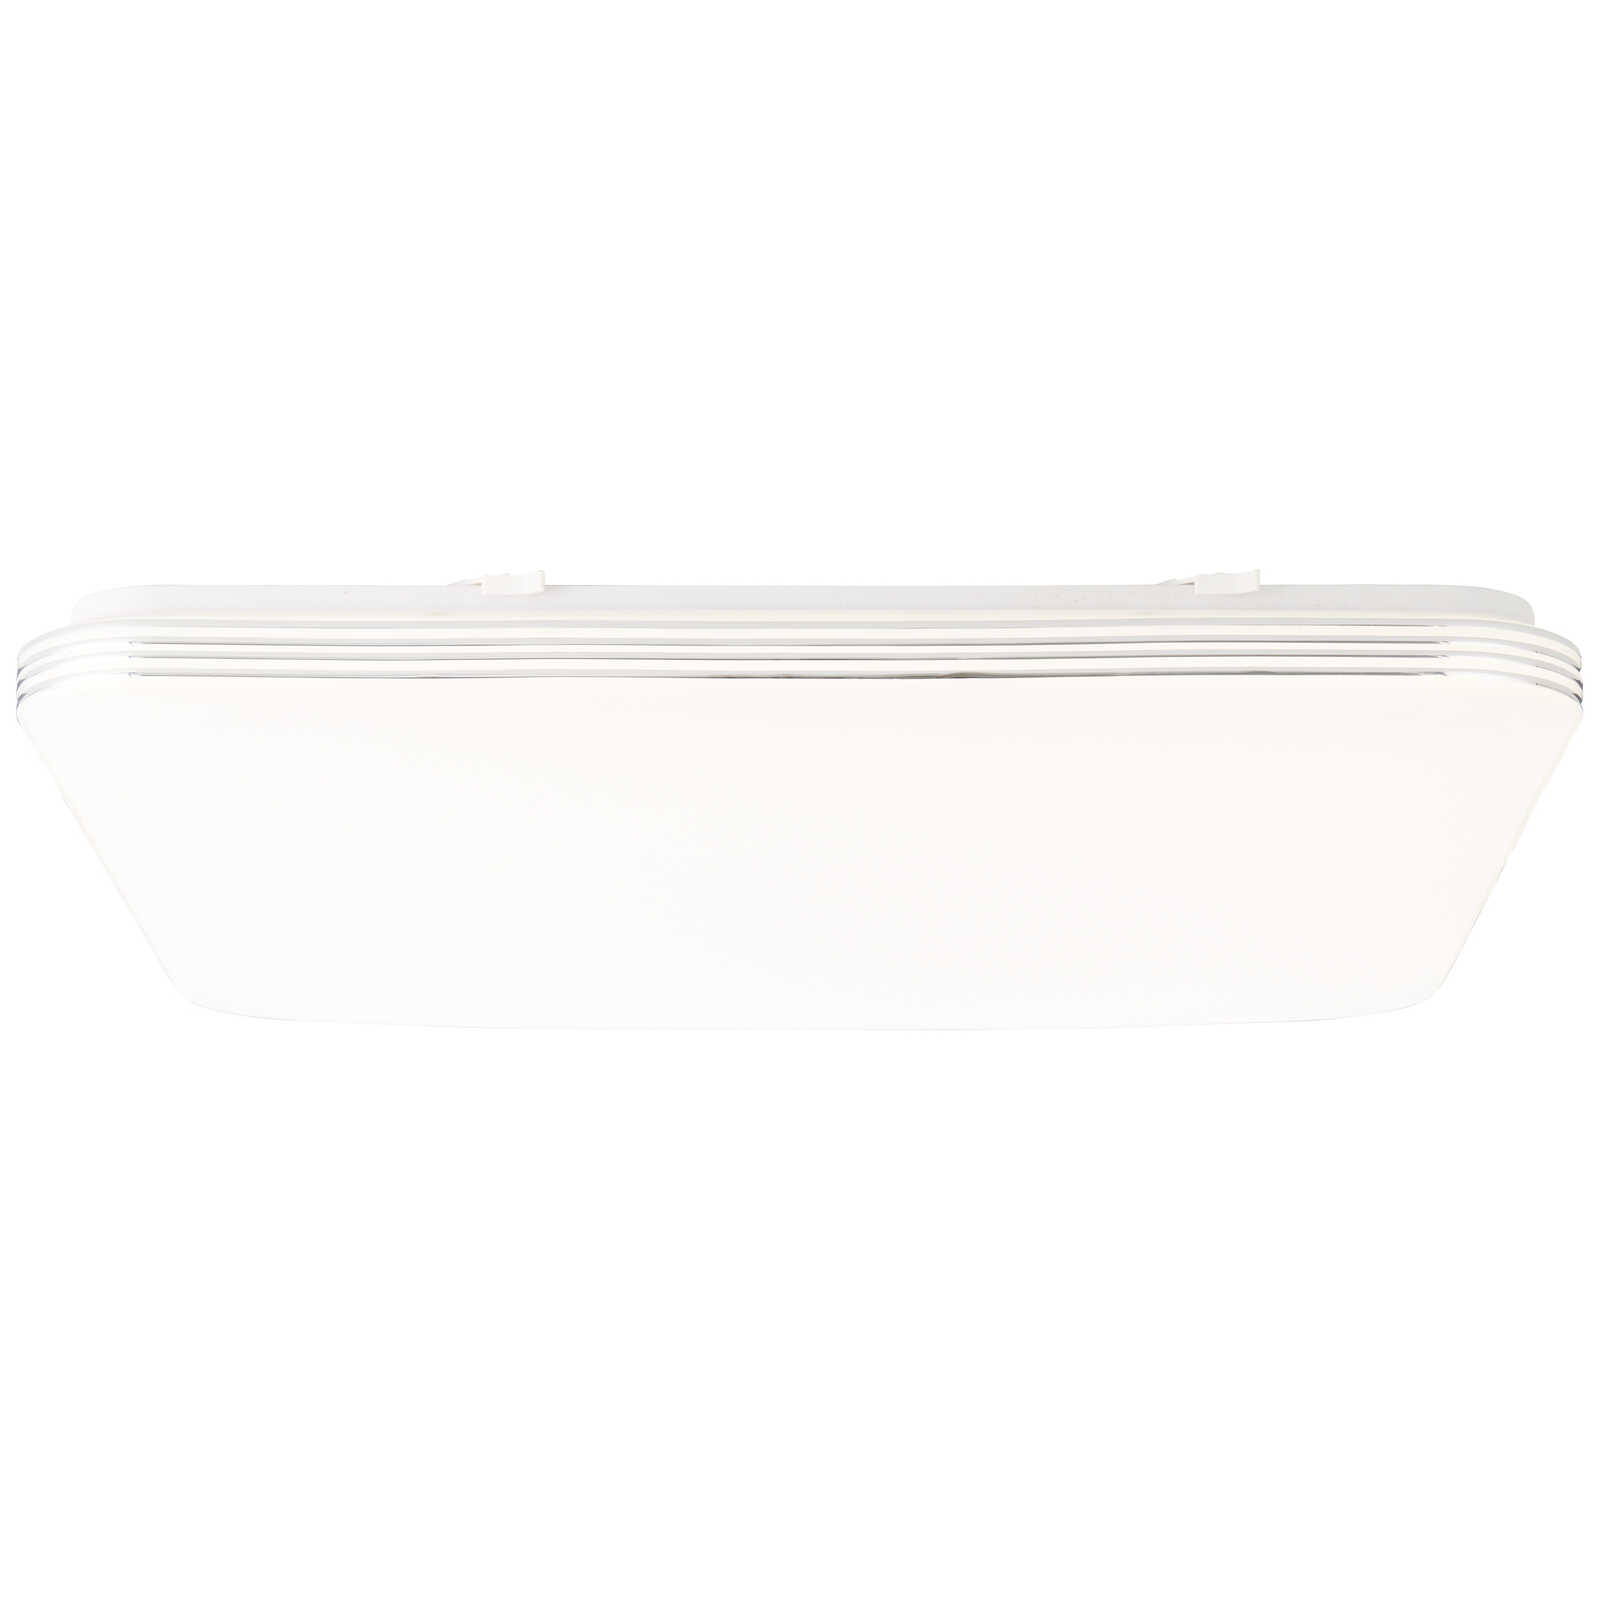             Plastic wall and ceiling light - Amelie - silver, white
        